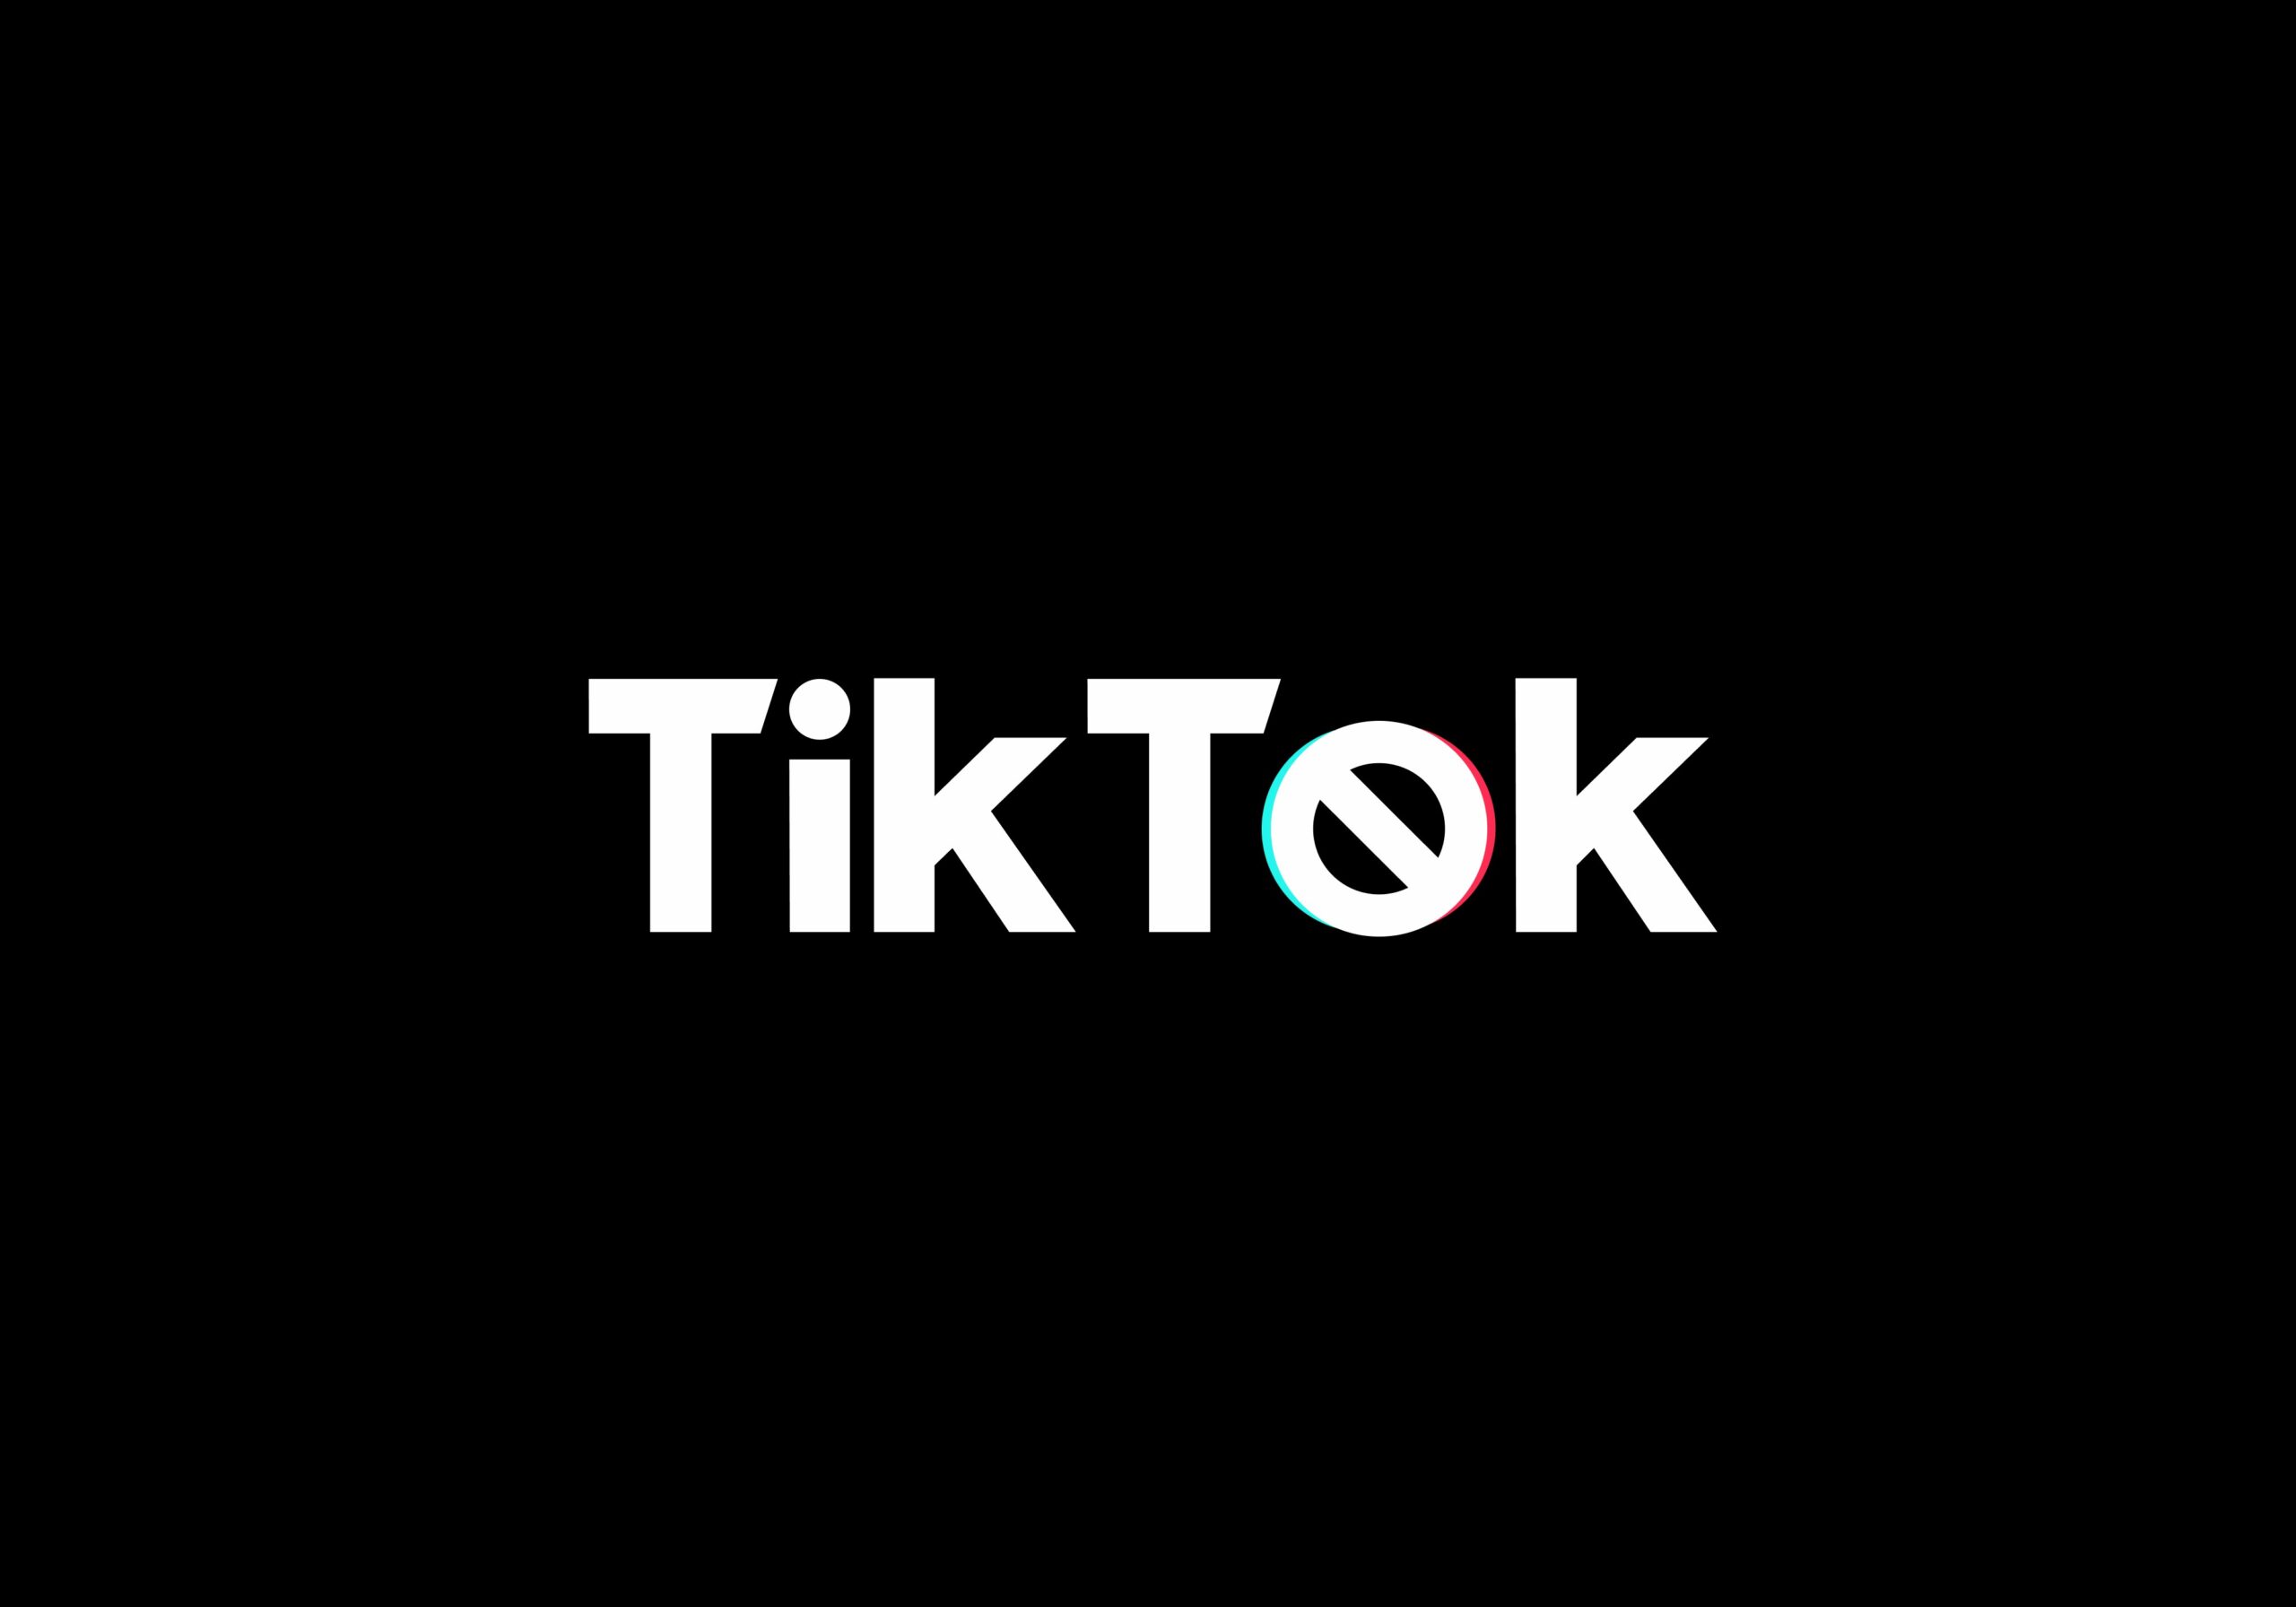 U.S. House Approves Bill to Ban or Sell TikTok